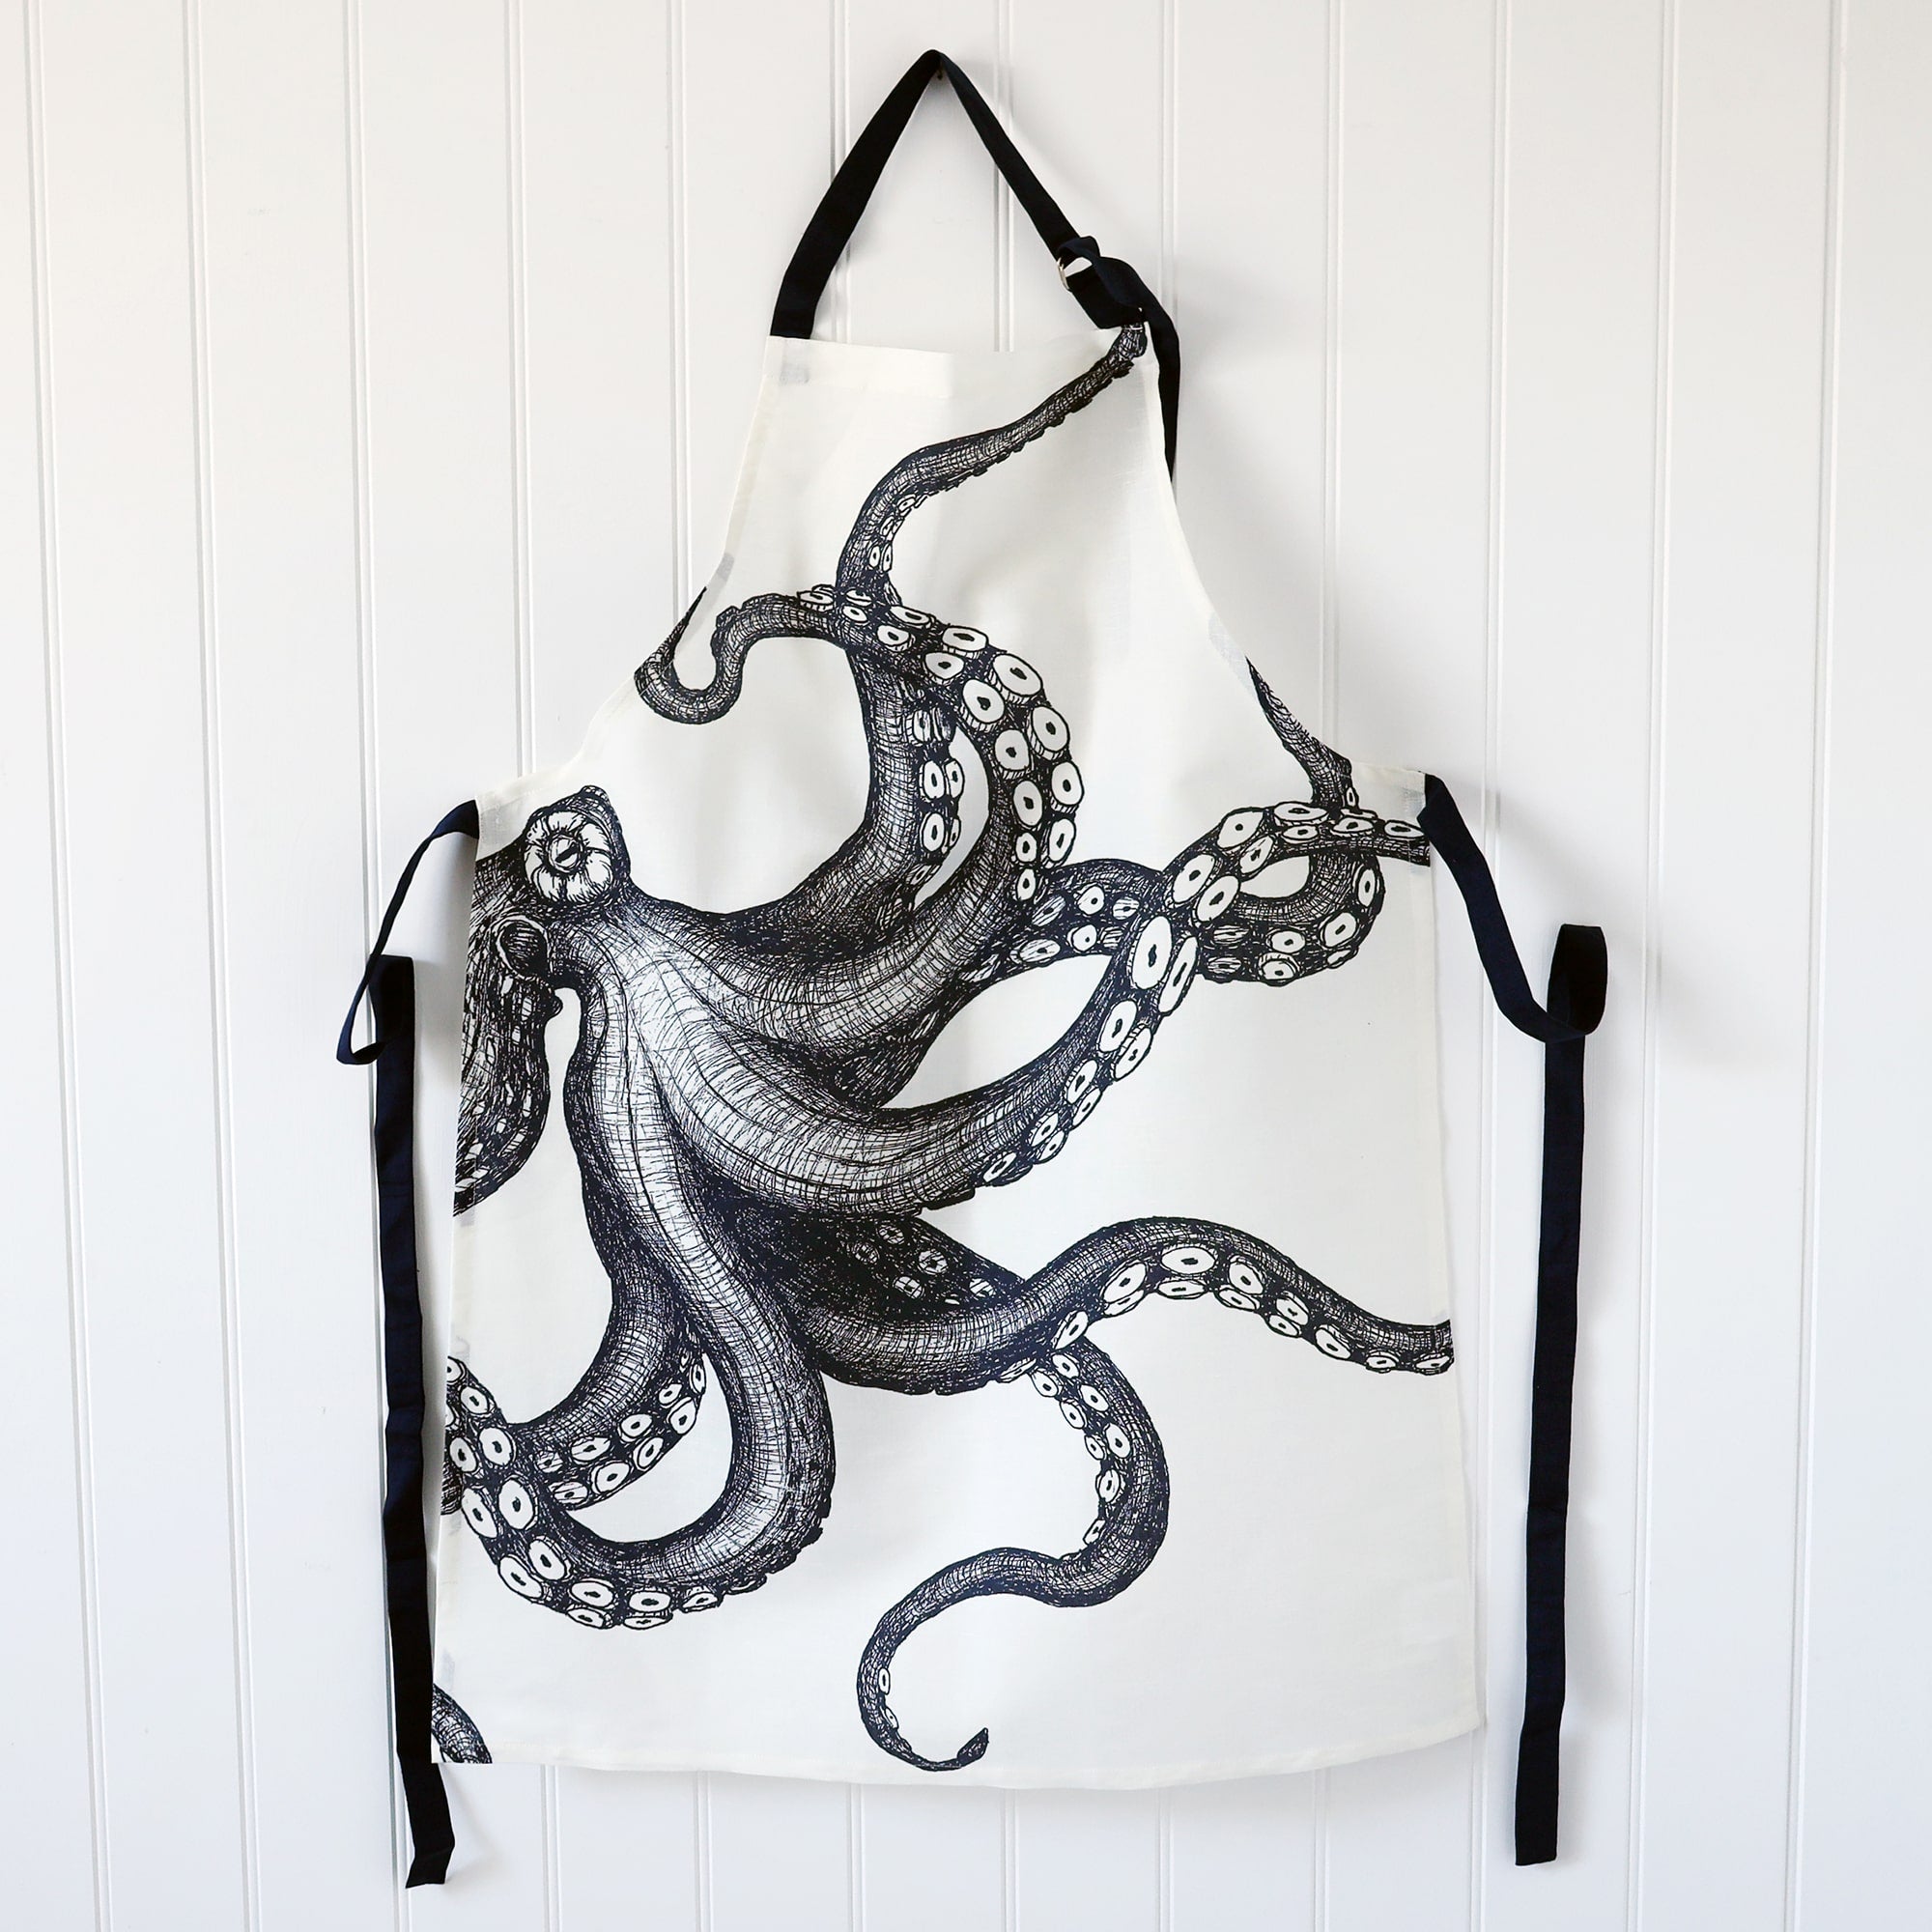 White Linen/Cotton mix apron with navy ties and Navy strap around the neck,this can be adjusted to fit.On the print is our Octopus design.